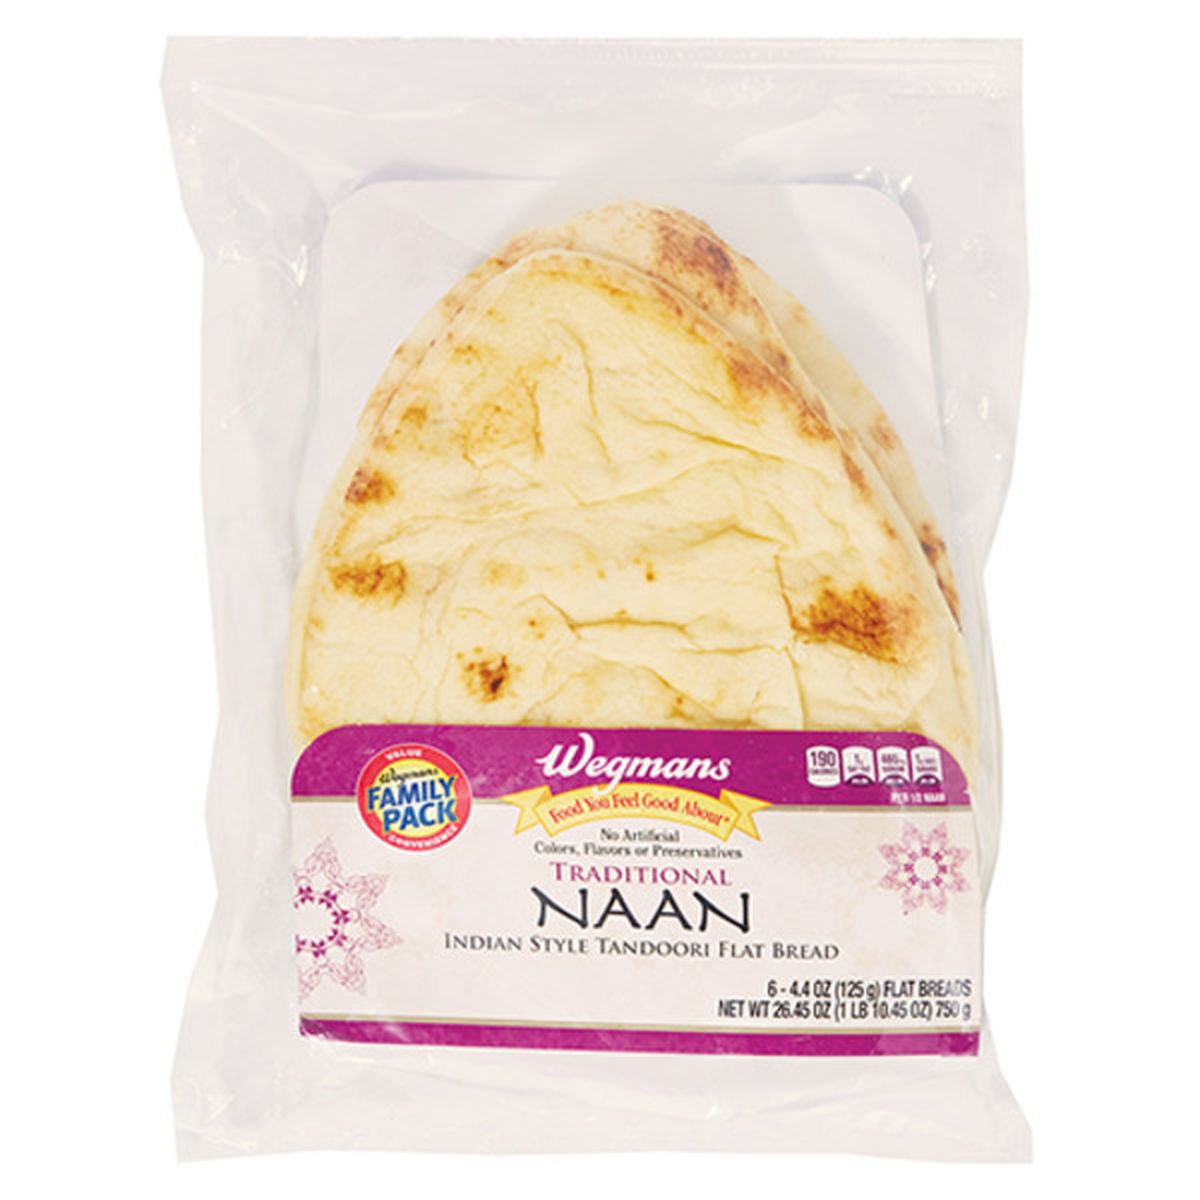 Calories in Wegmans Traditional Naan, FAMILY PACK